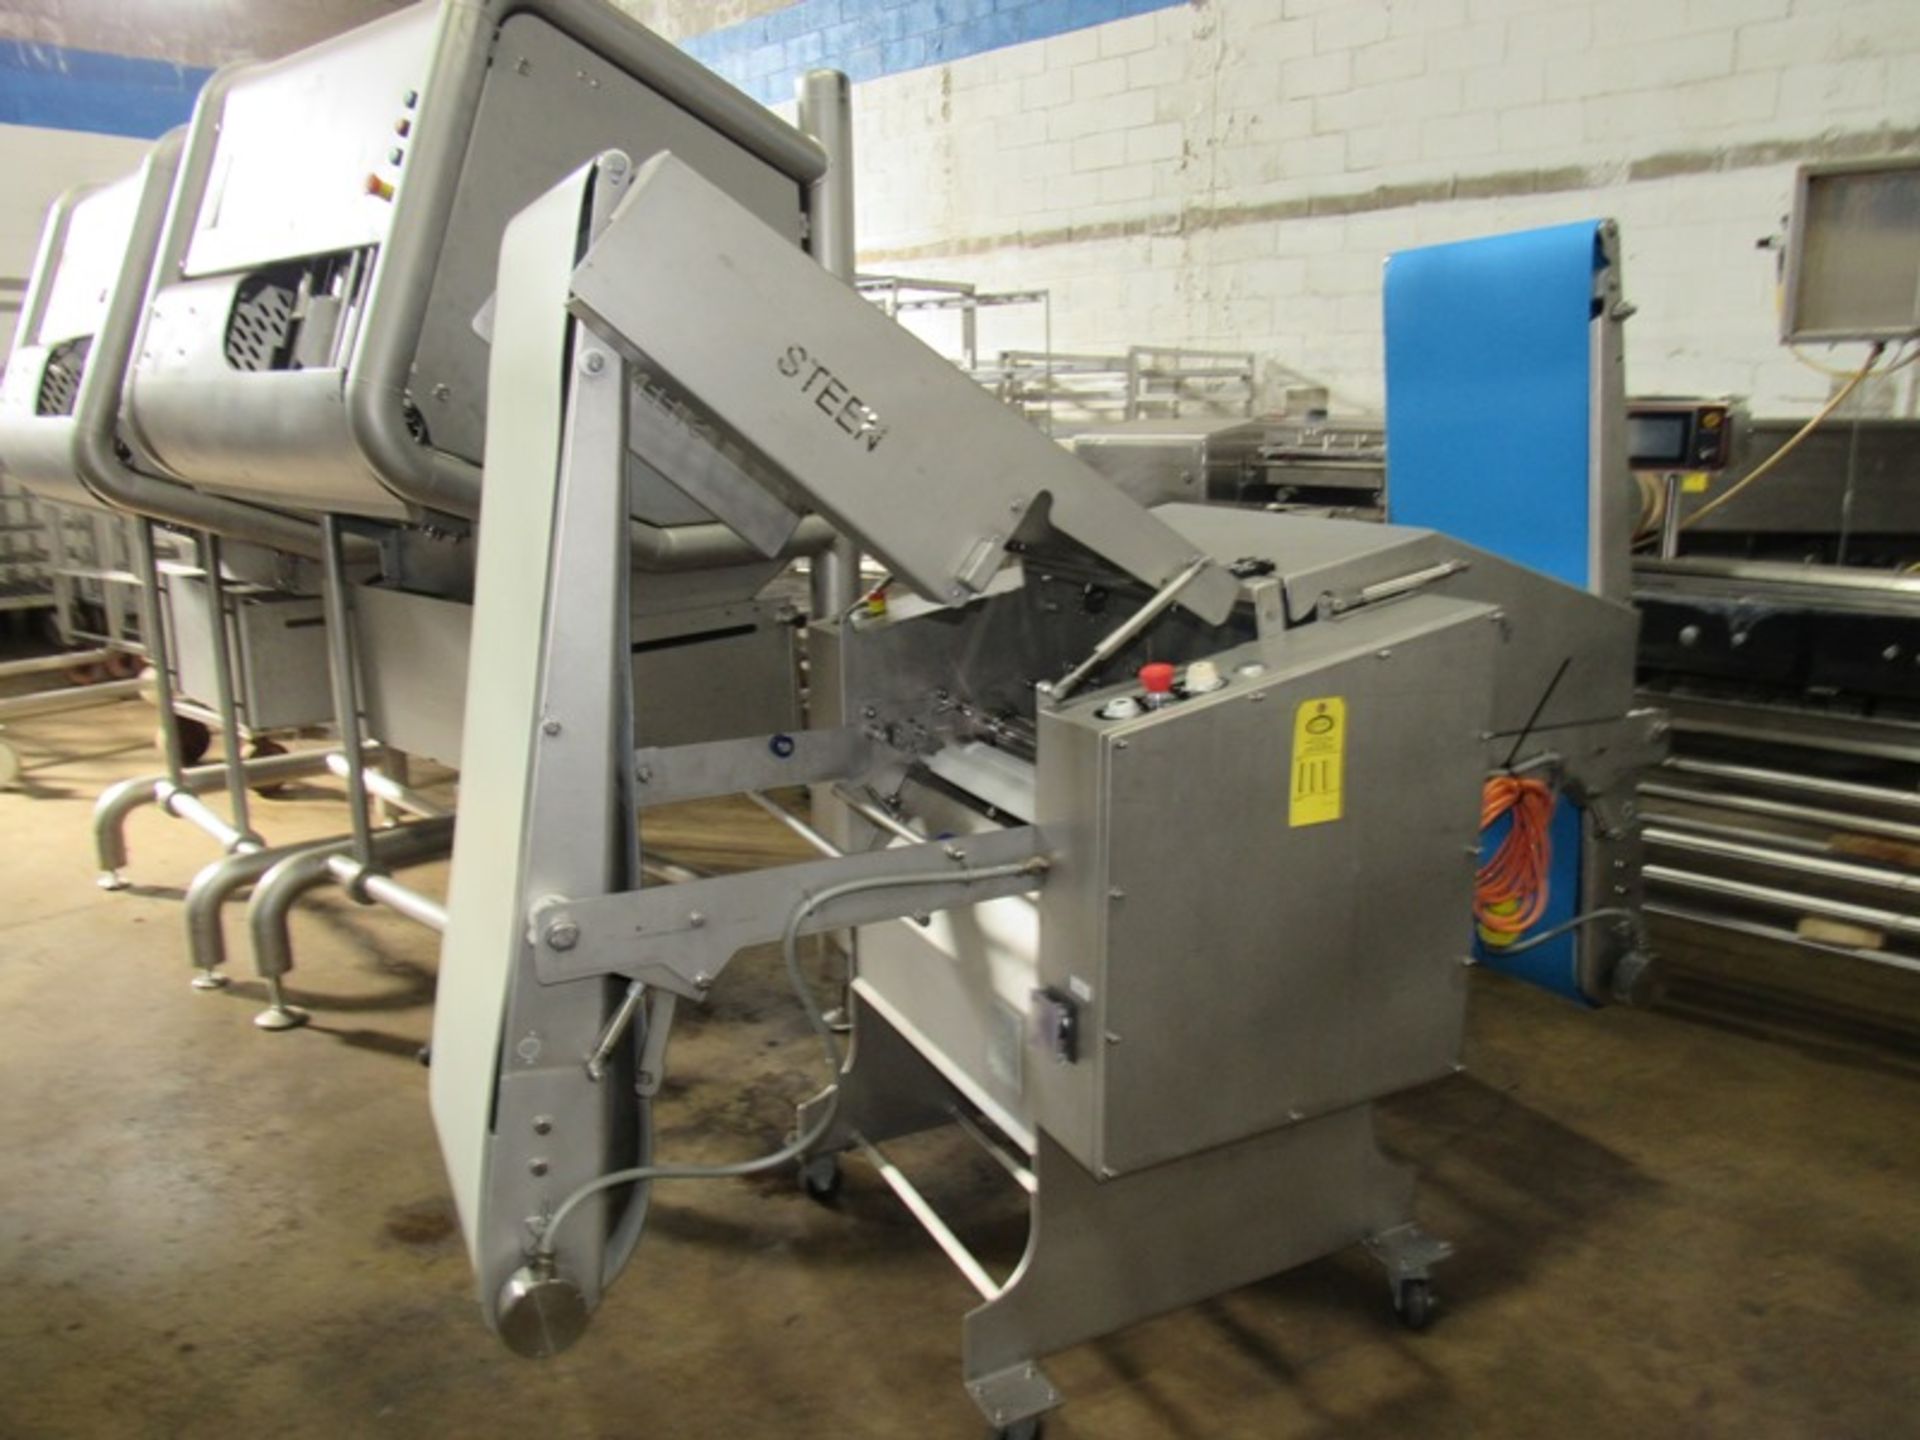 Steen Mdl. ST700 Automatic Conveyorized Skinner, long model, Ser. #268/2417F, 480 volts (Located